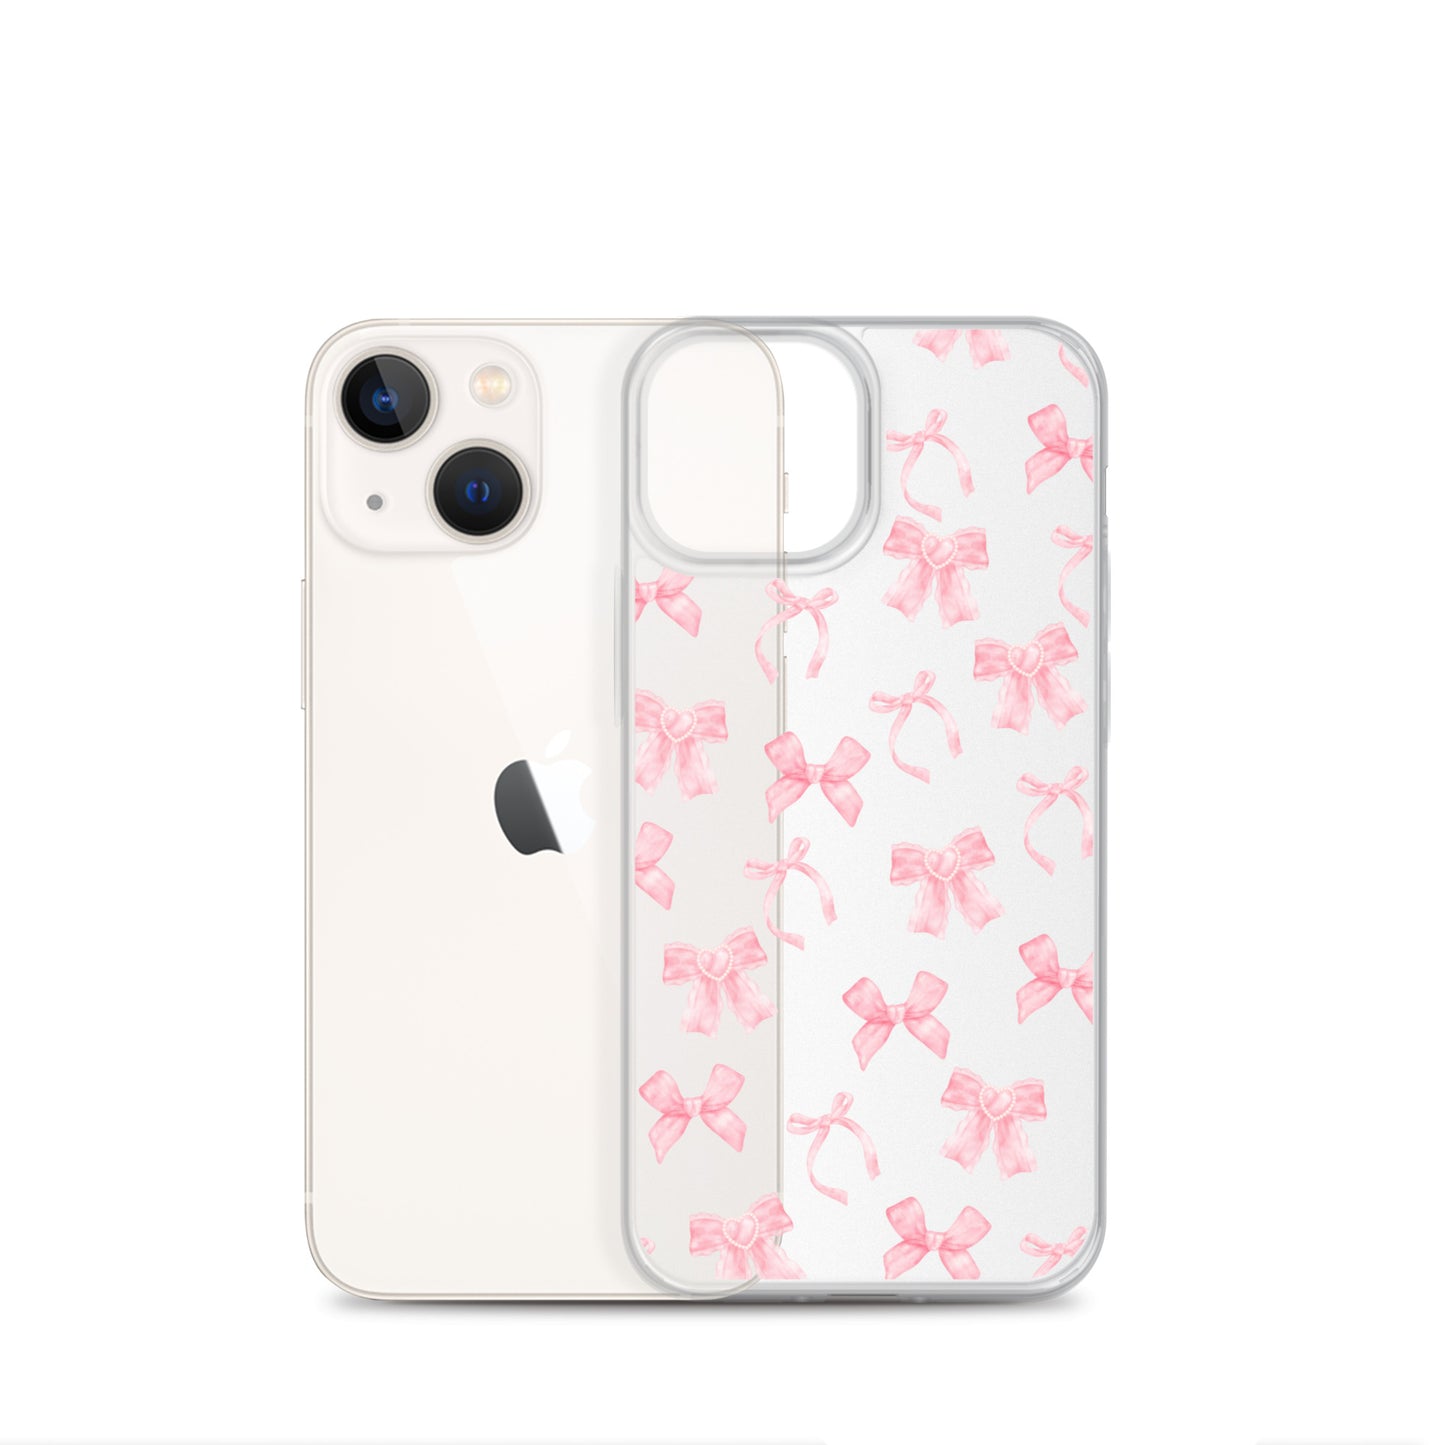 Coquette Bows Clear iPhone Case